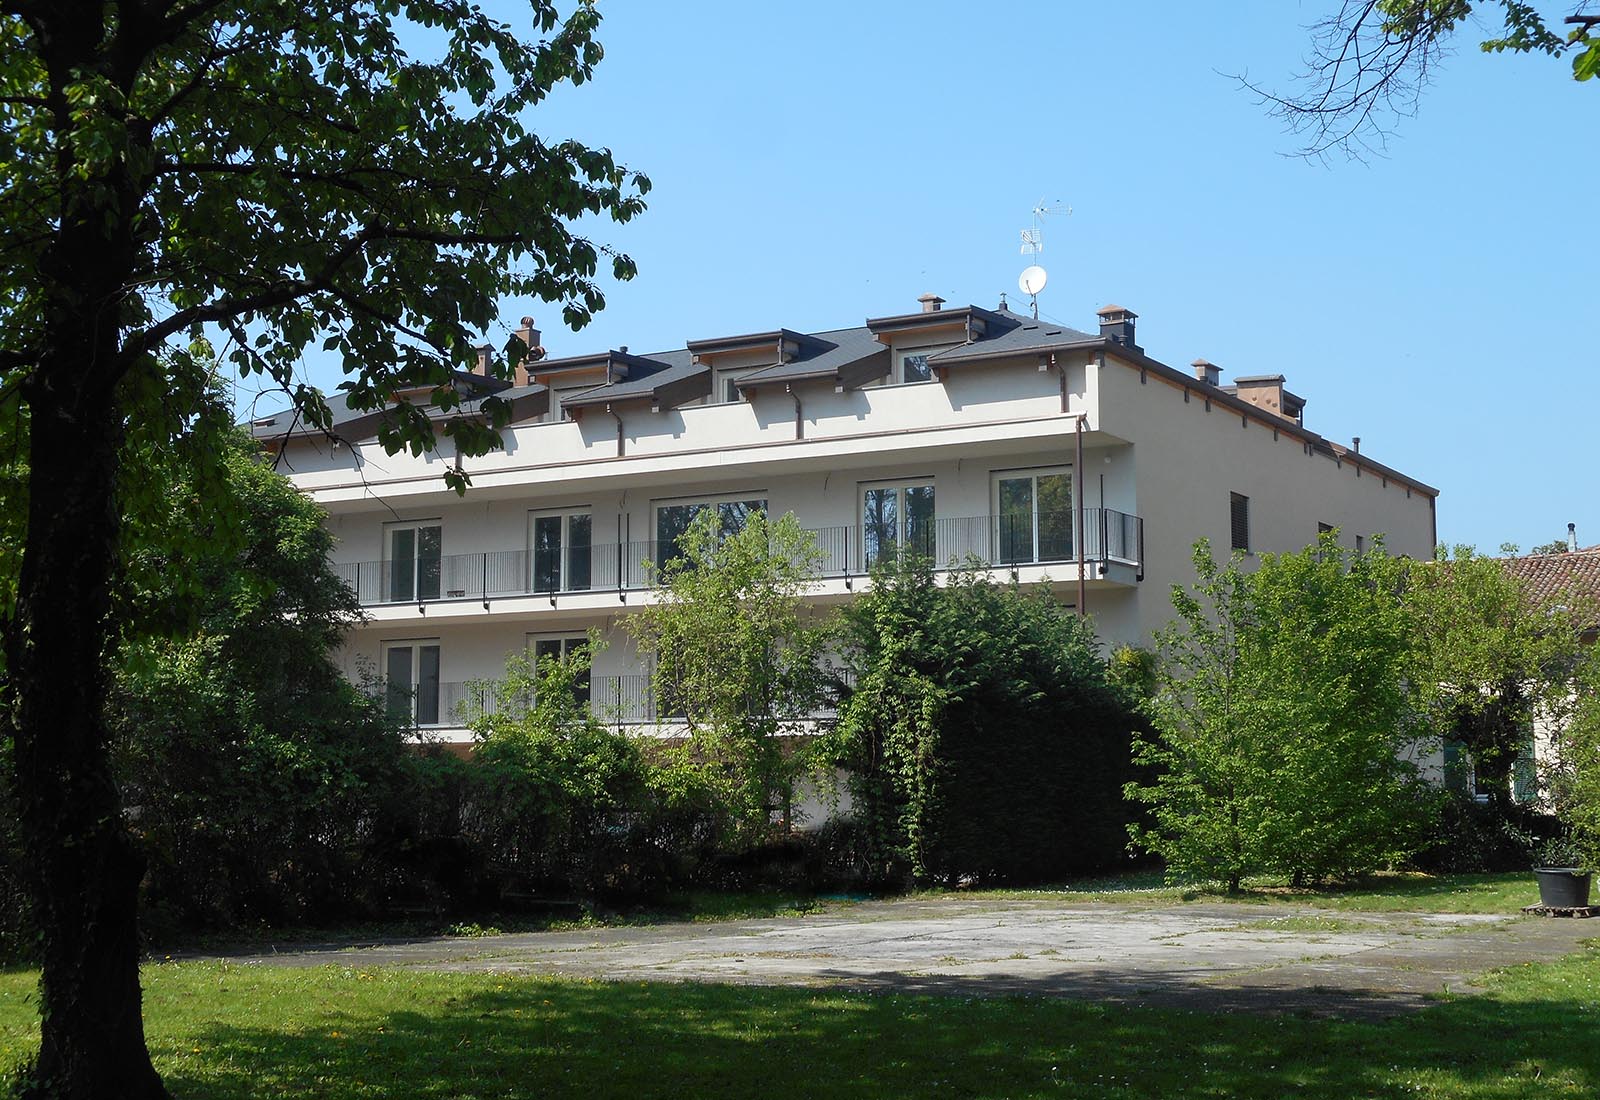 Residential building in Visconti square in Rho - View